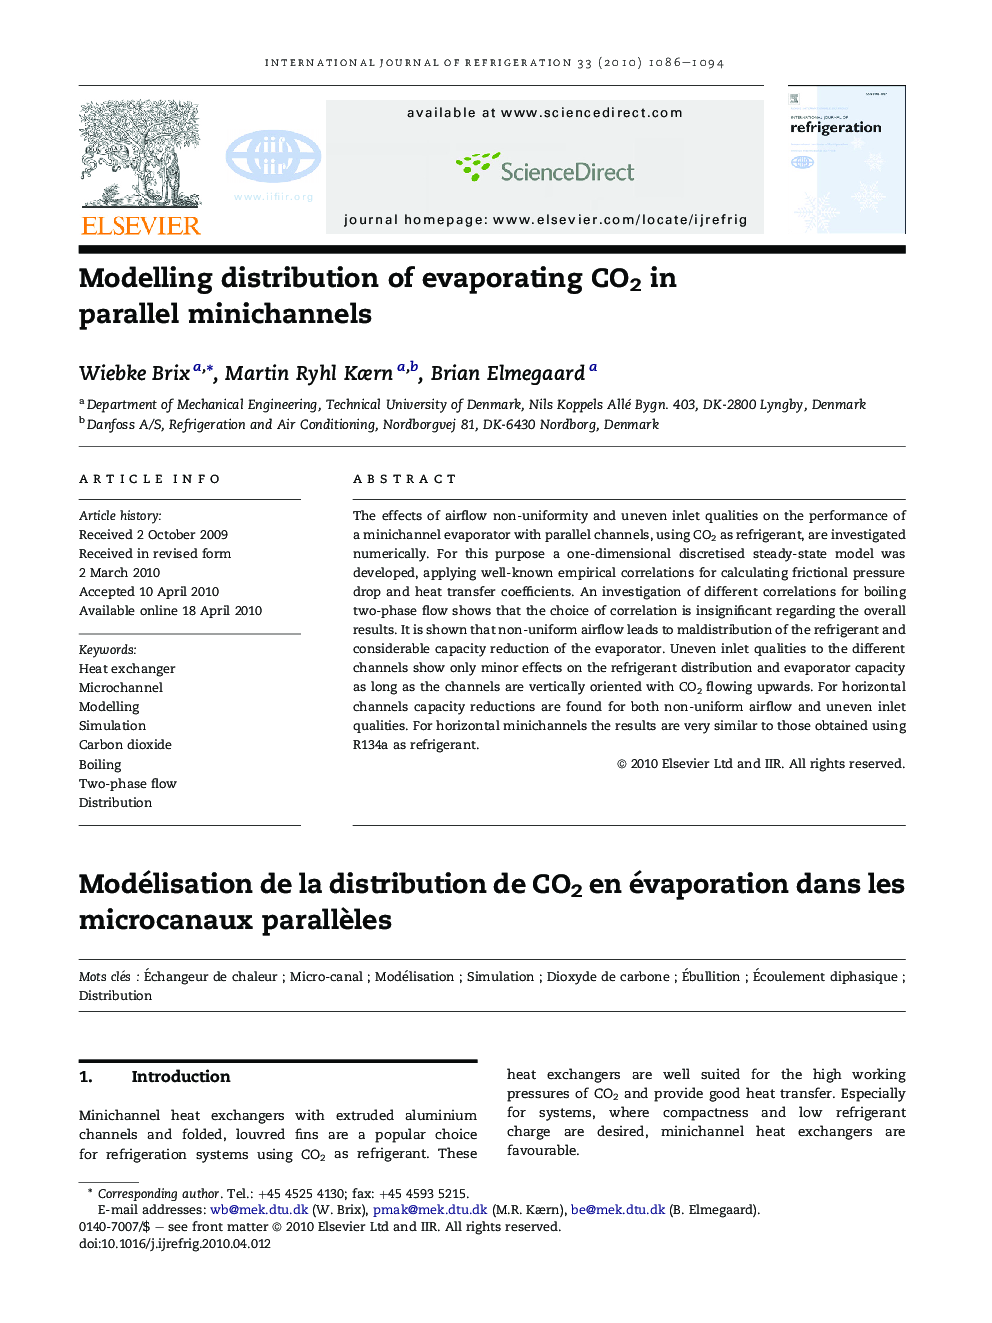 Modelling distribution of evaporating CO2 in parallel minichannels